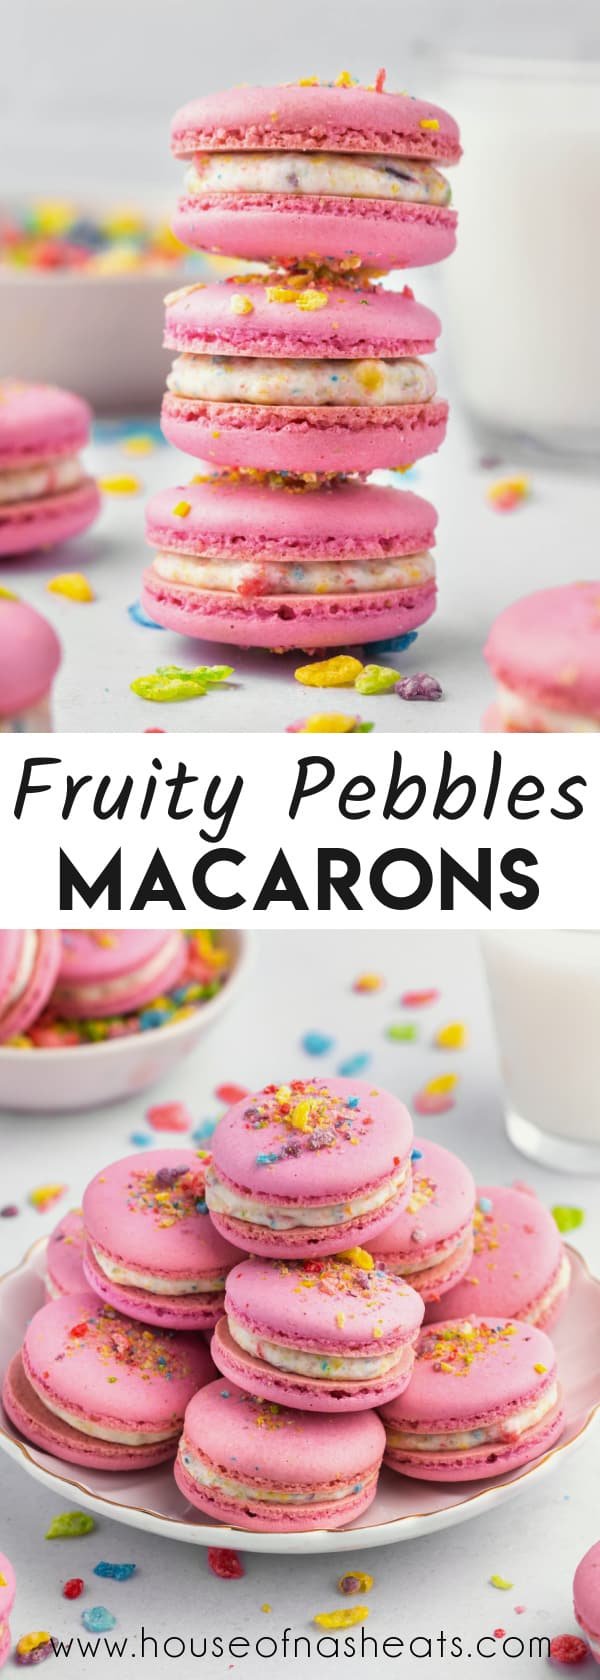 A collage of images of Fruity Pebbles macarons with text overlay.